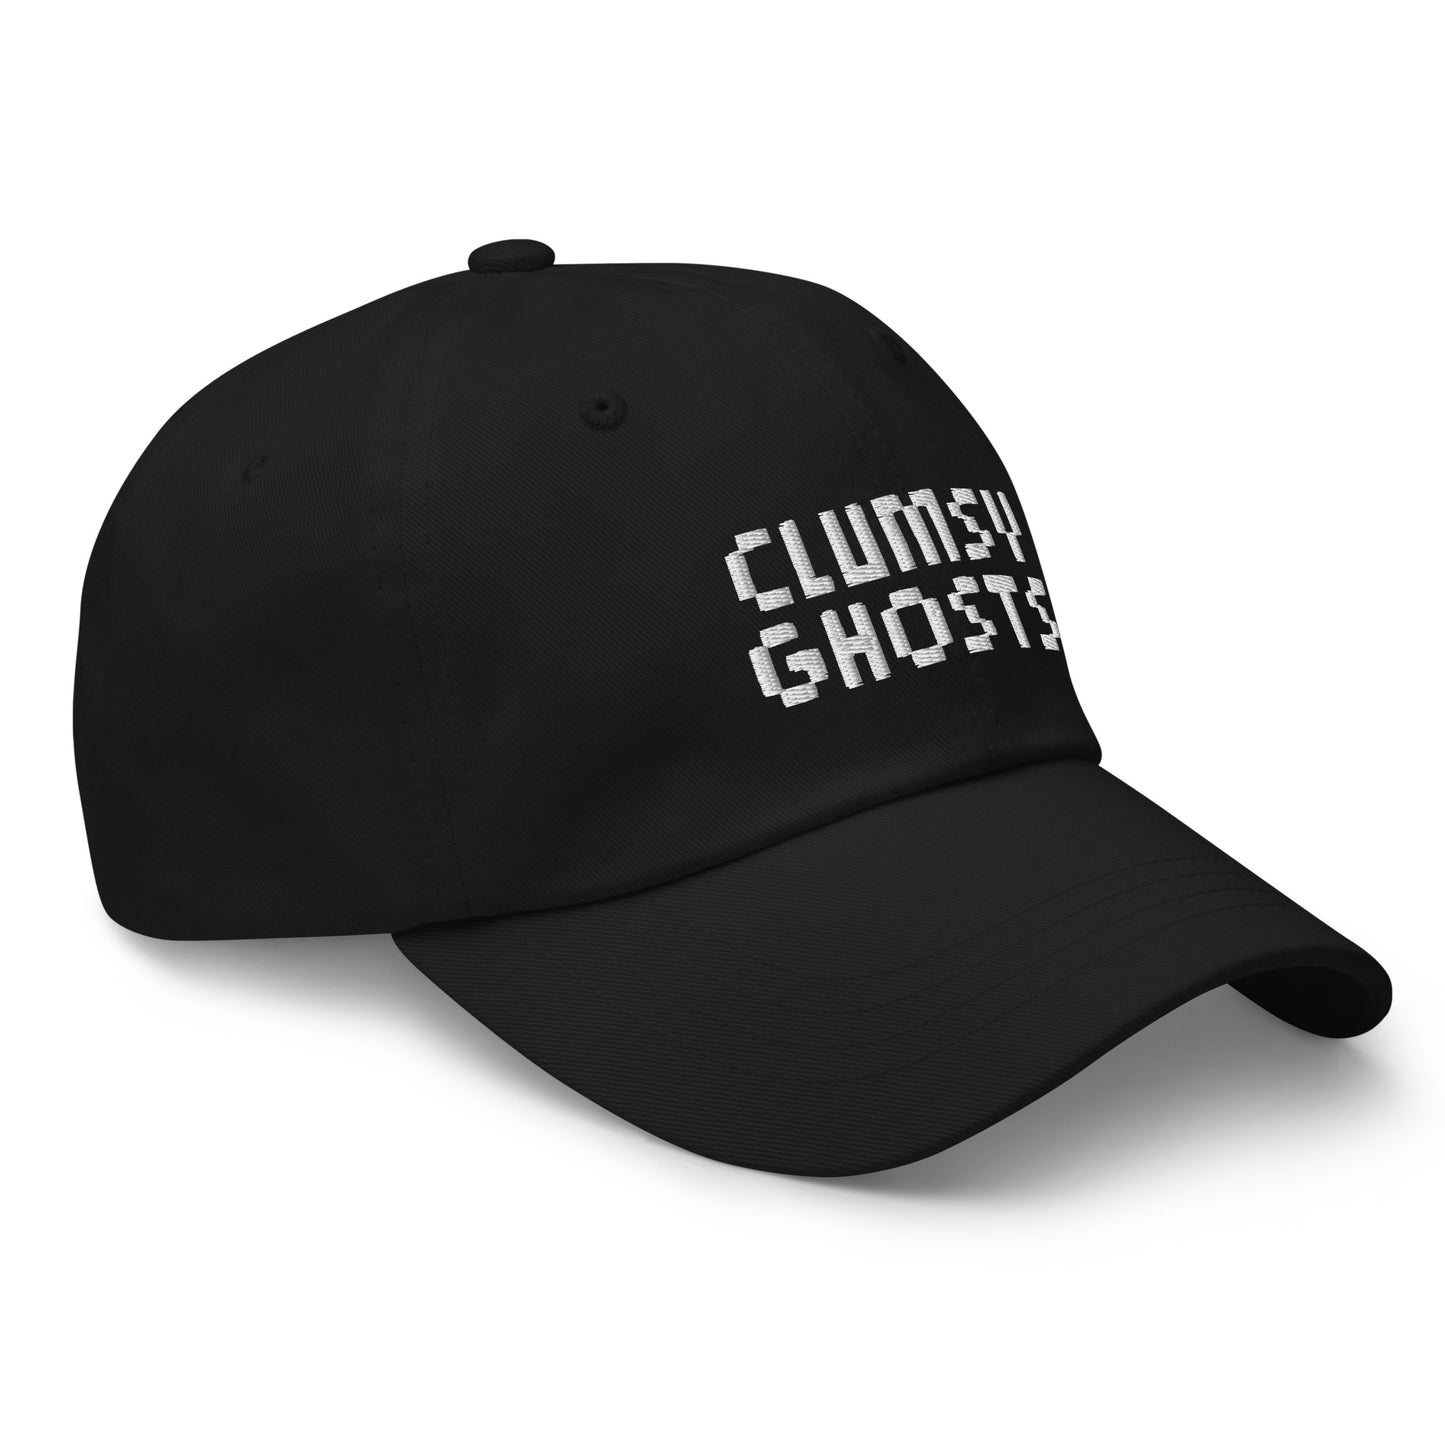 Clumsy Ghosts Hat